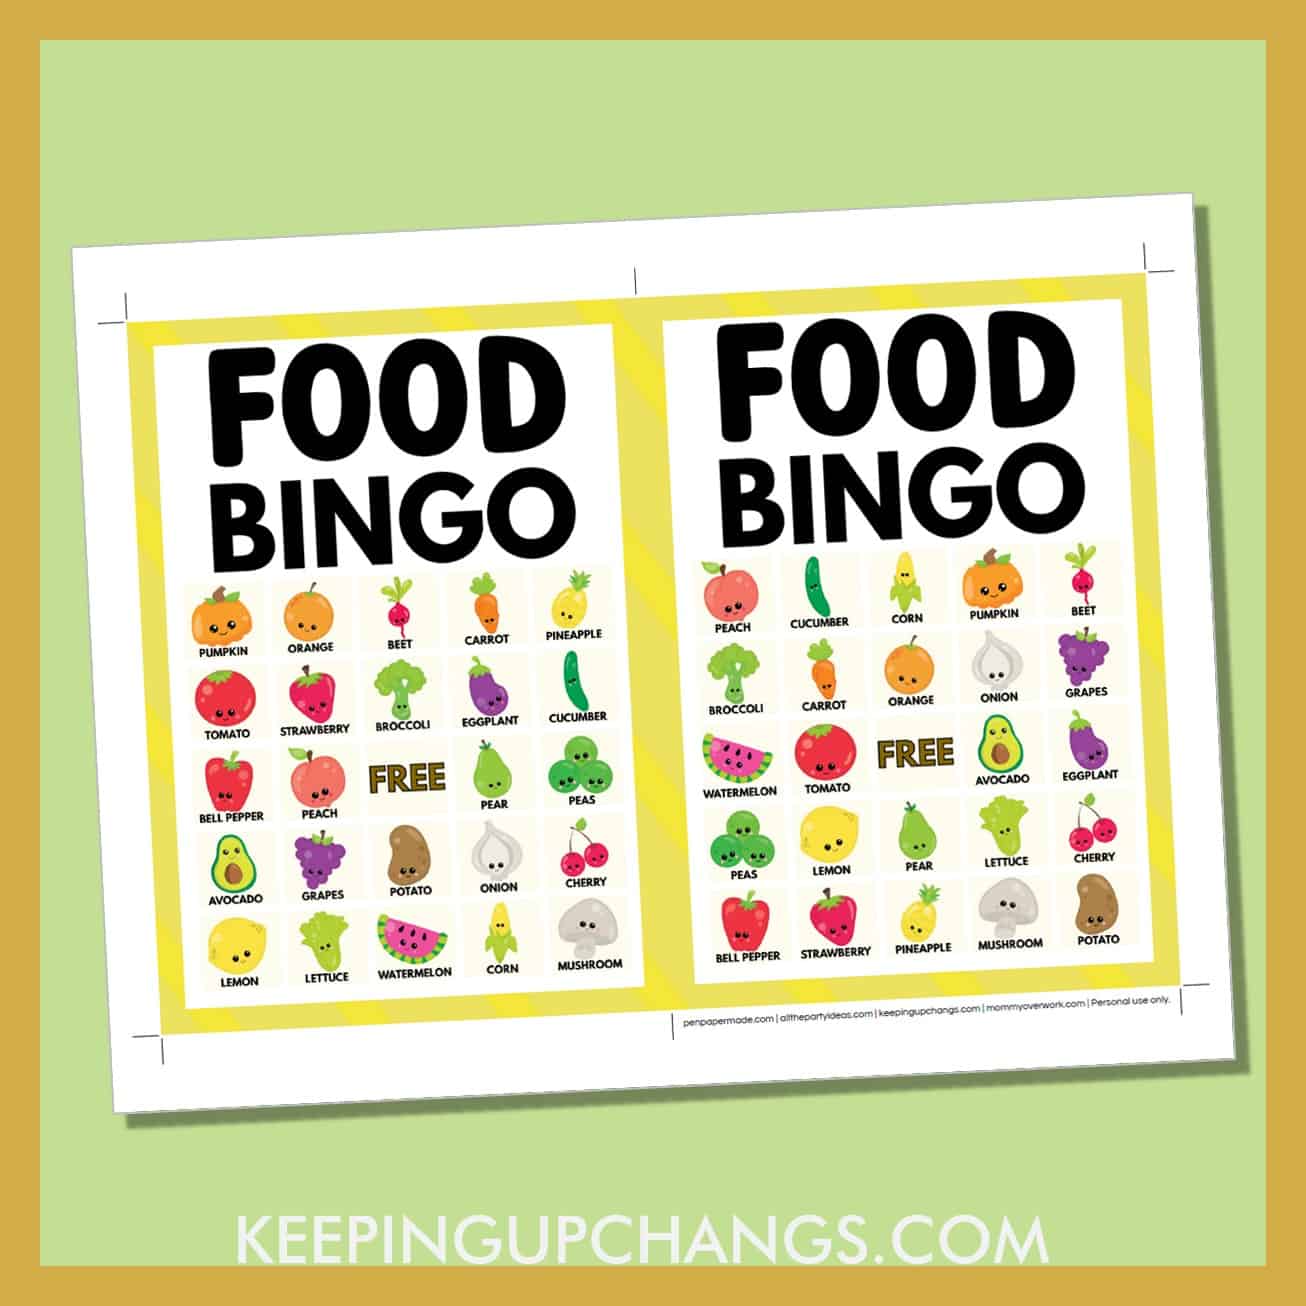 free food bingo card 5x5 5x7 game boards with images and text words.